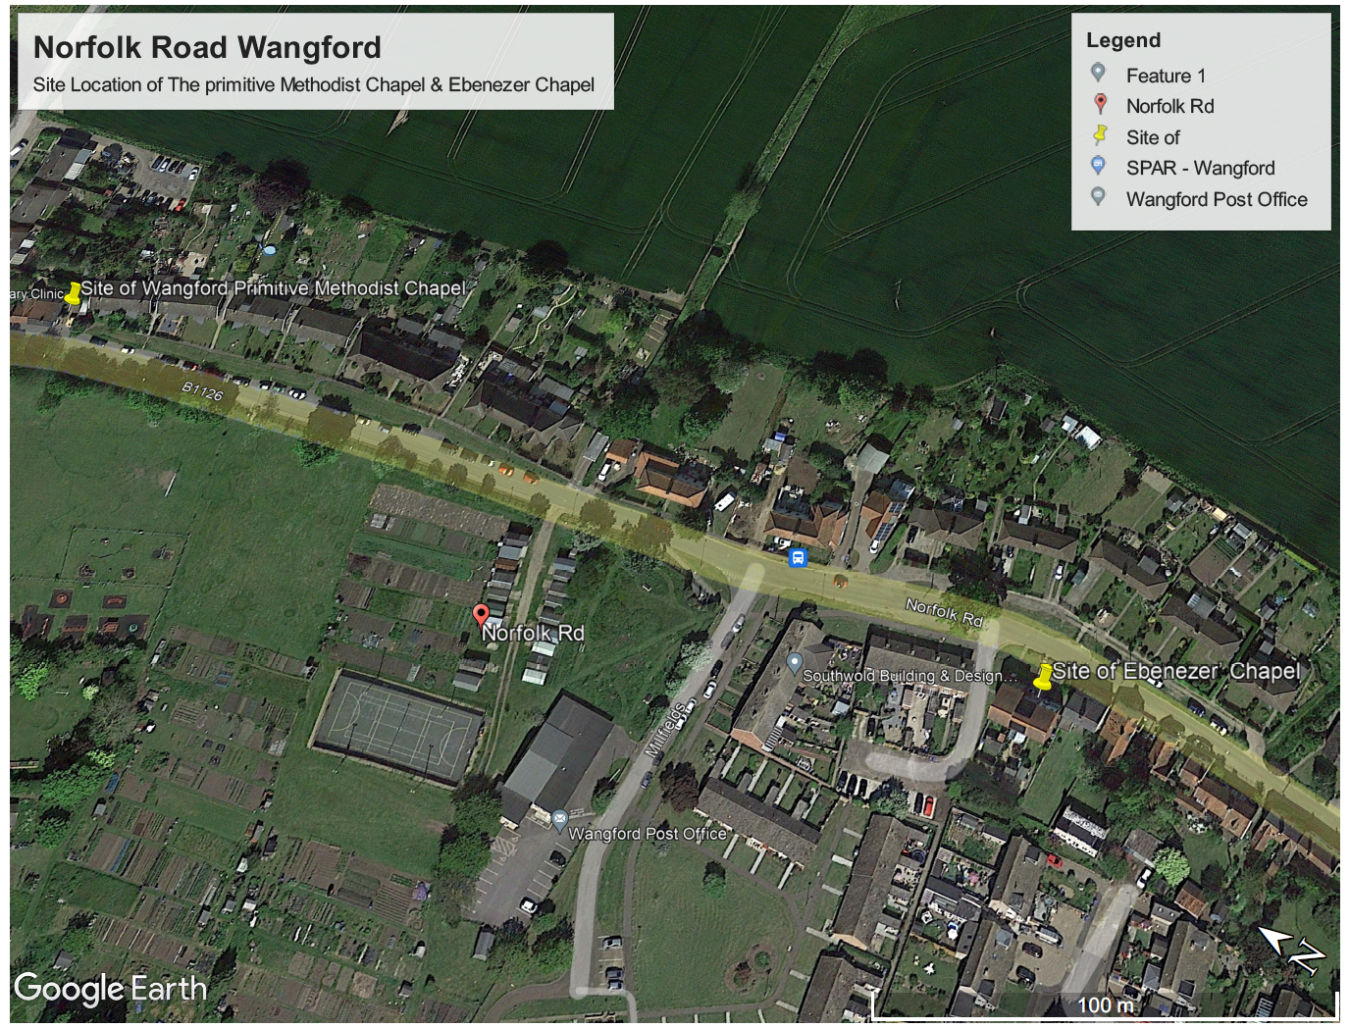 Map of the Chapel locations in Wangford